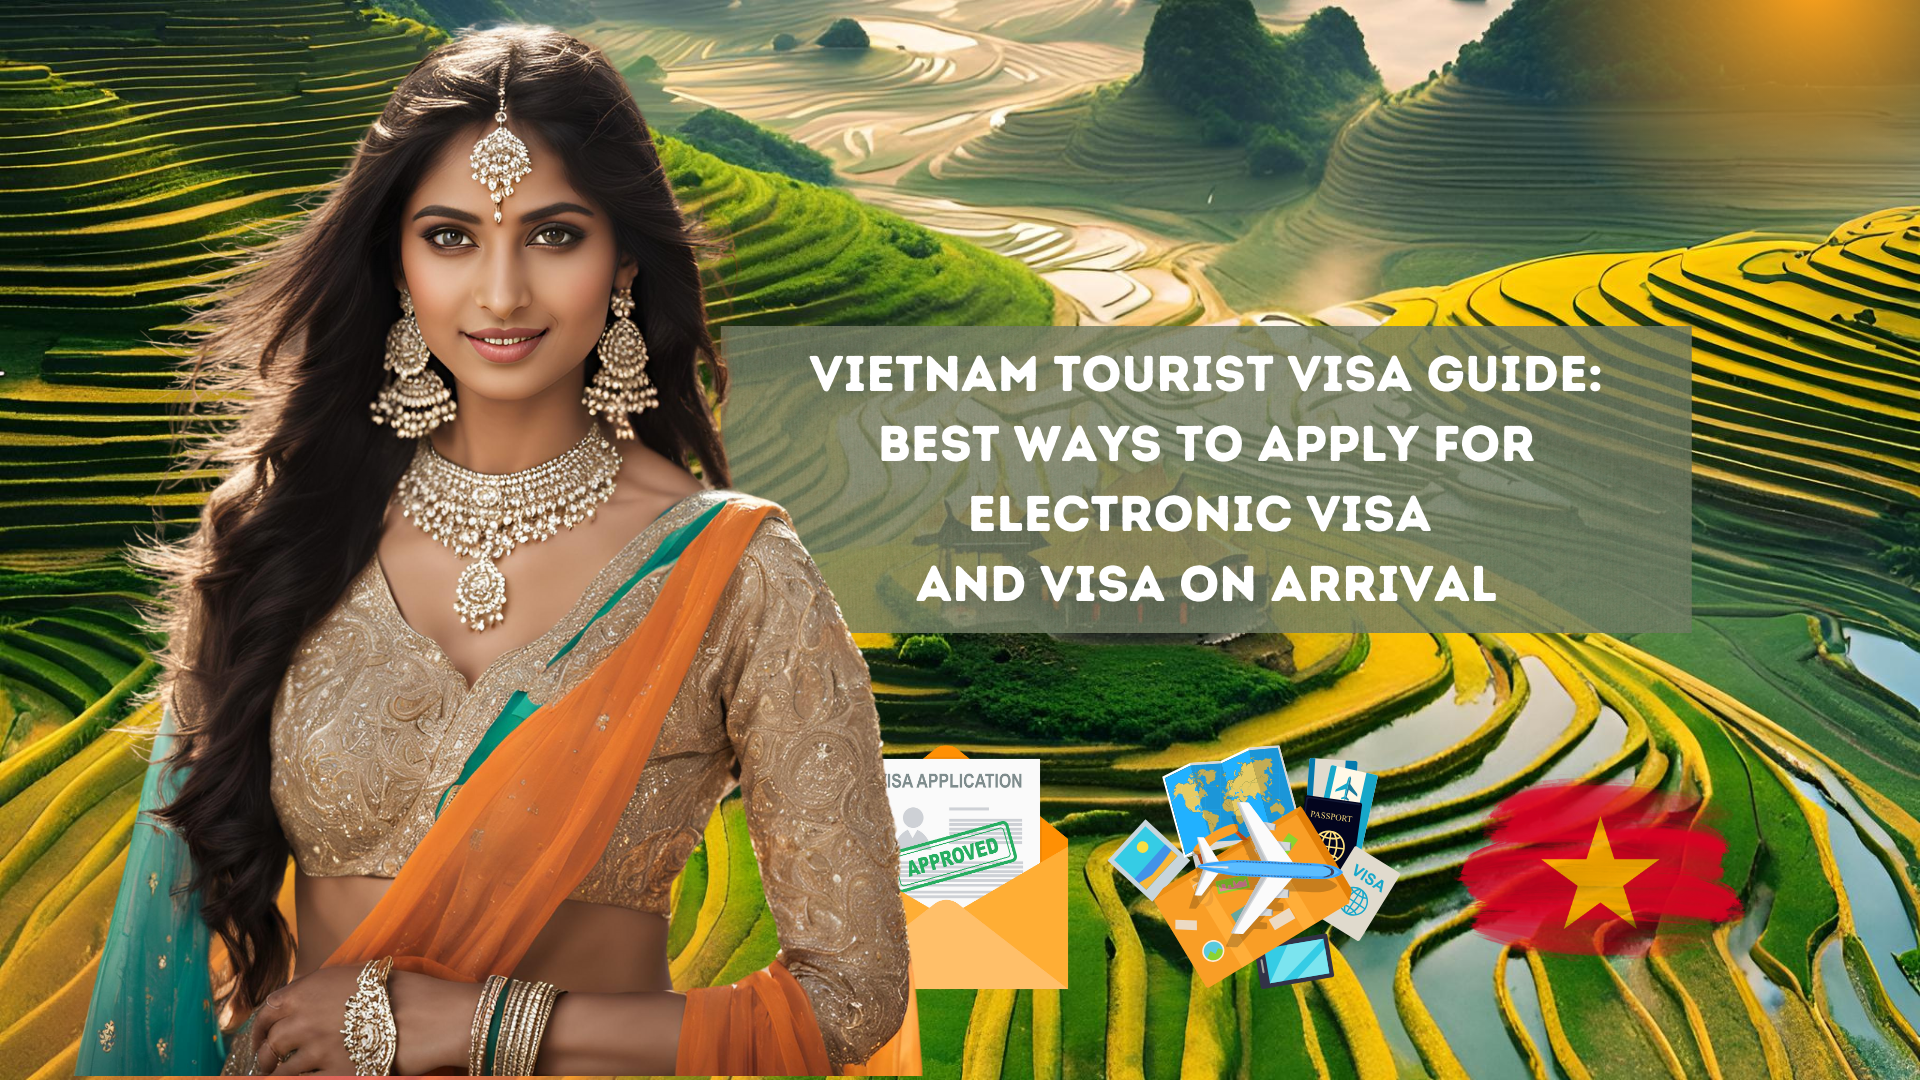 Vietnam Tourist Visa Guide: Best Ways to Apply for Electronic visa and Visa on Arrival